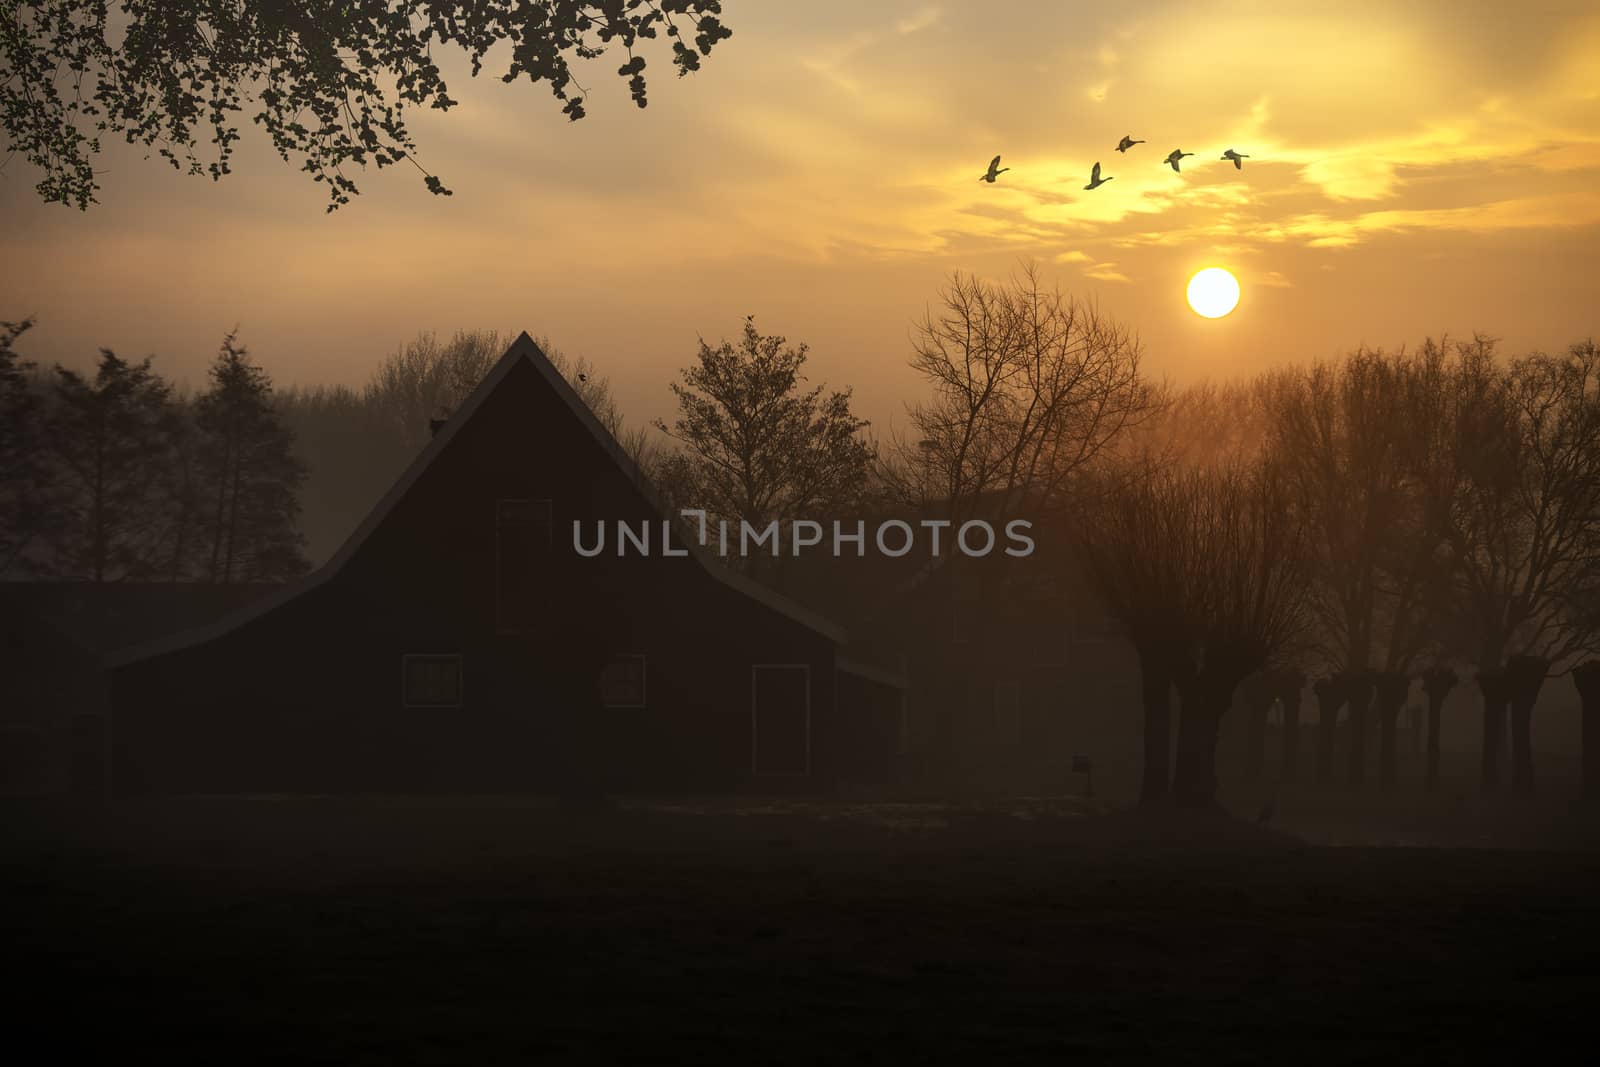 Ducks flying over a beautiful typical Dutch wooden houses architecture at the sunrise moment mirrored on the calm canal of Zaanse Schans located in the North of Amsterdam, Netherlands by ankorlight